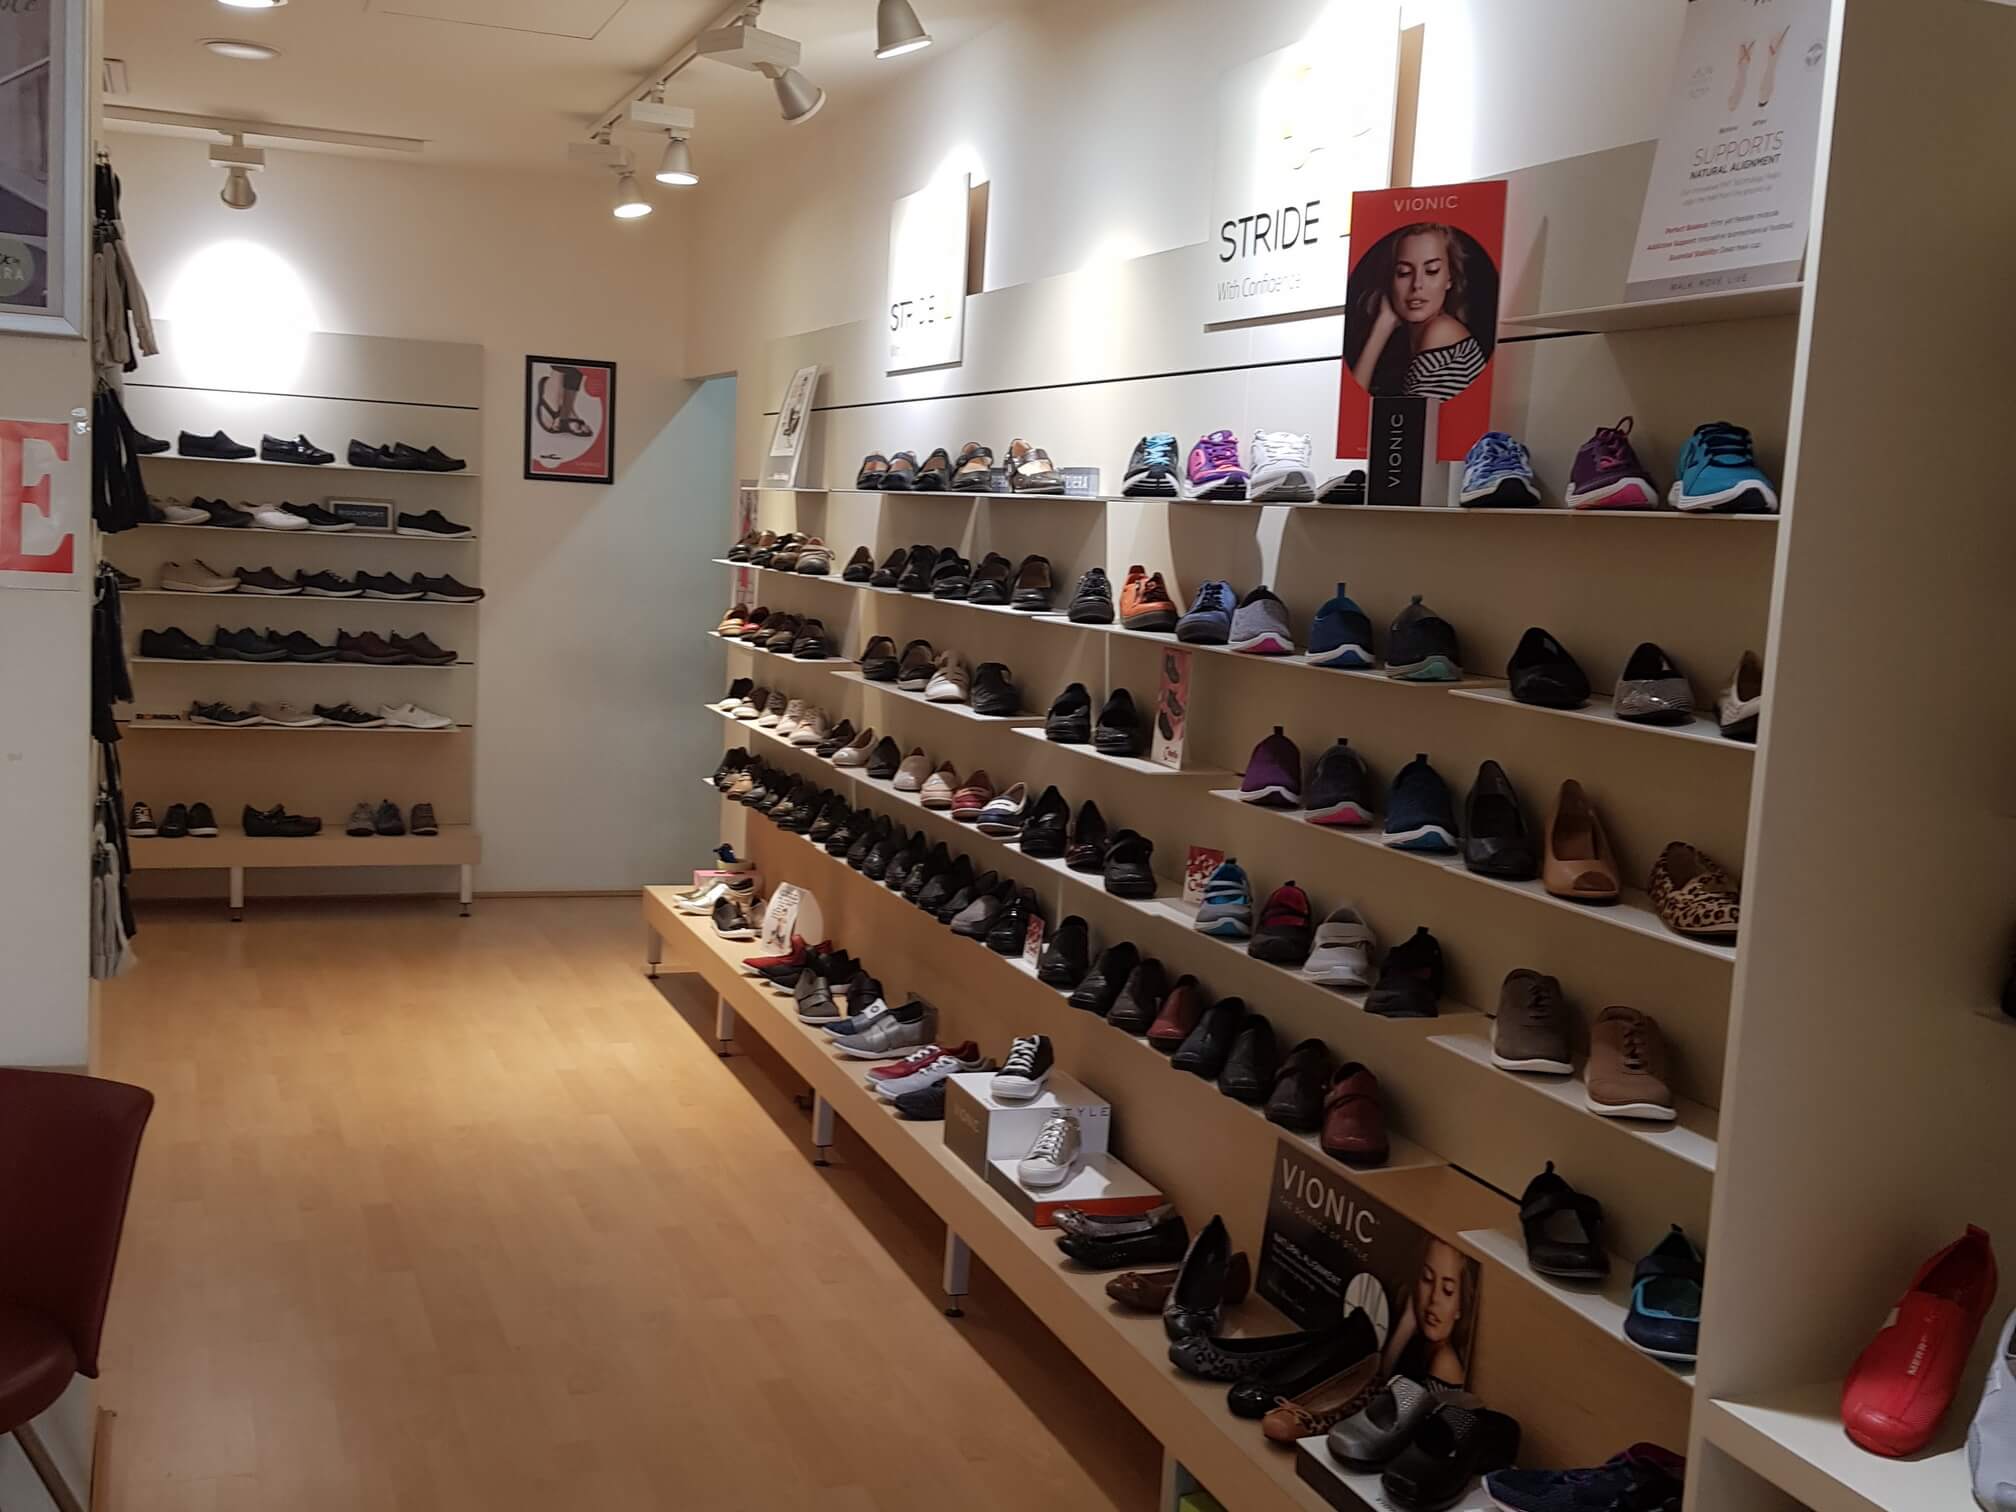 kumfs shoes factory outlet